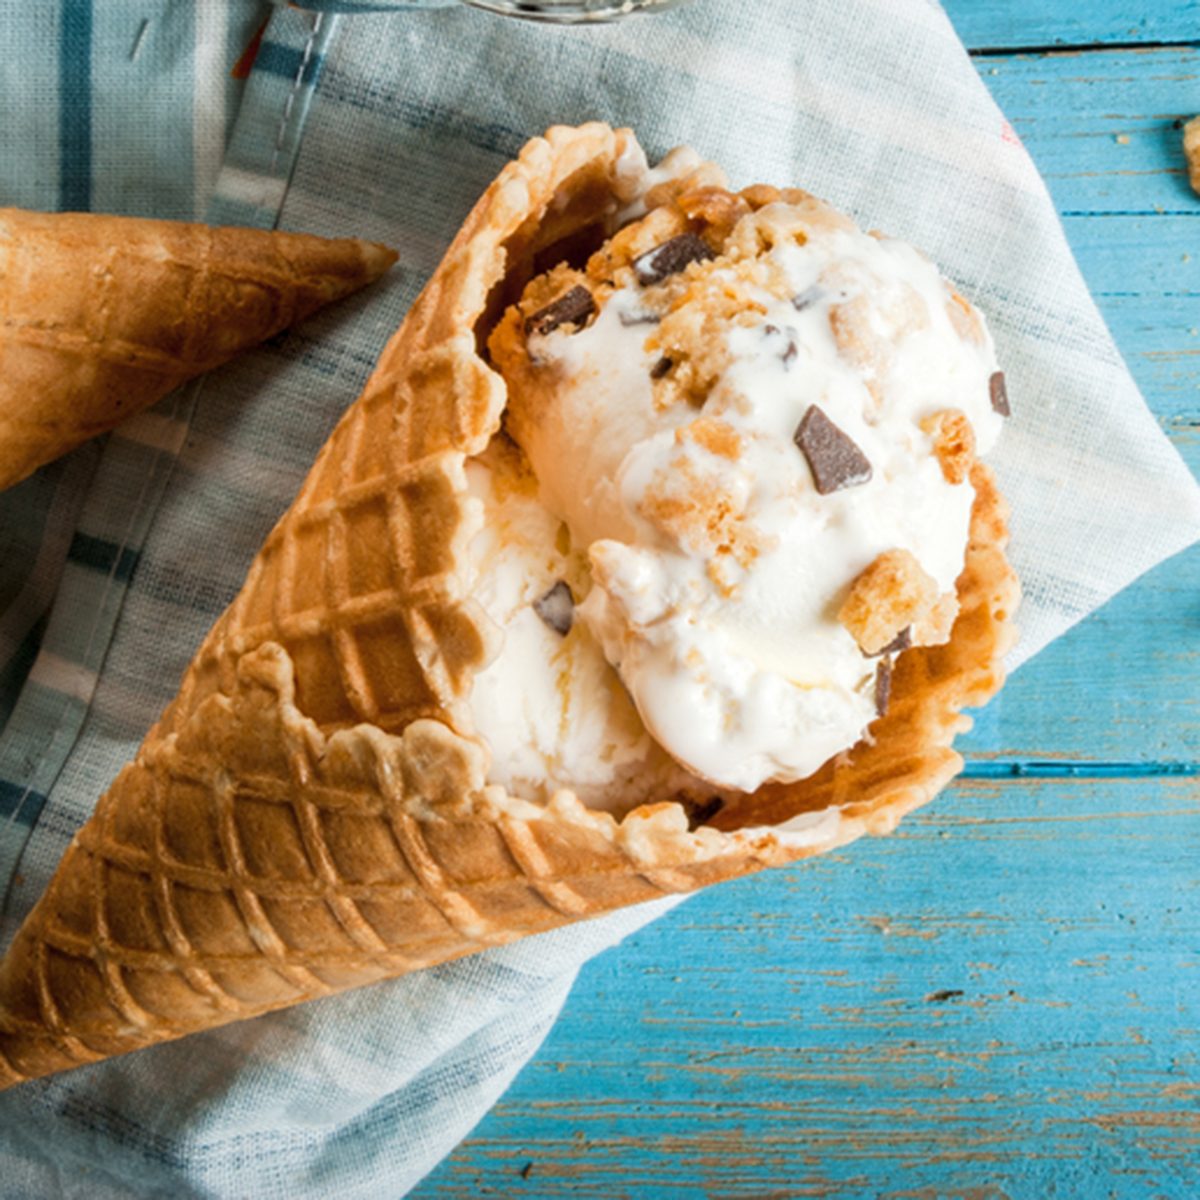 Traditional waffle cones for ice cream and a spoon for it on blue wooden table. Summer, open space, bright sun Wafers and chocolate chips in a frame on the table One of cones filled with ice cream; Shutterstock ID 518542783; Job (TFH, TOH, RD, BNB, CWM, CM): Taste of Home